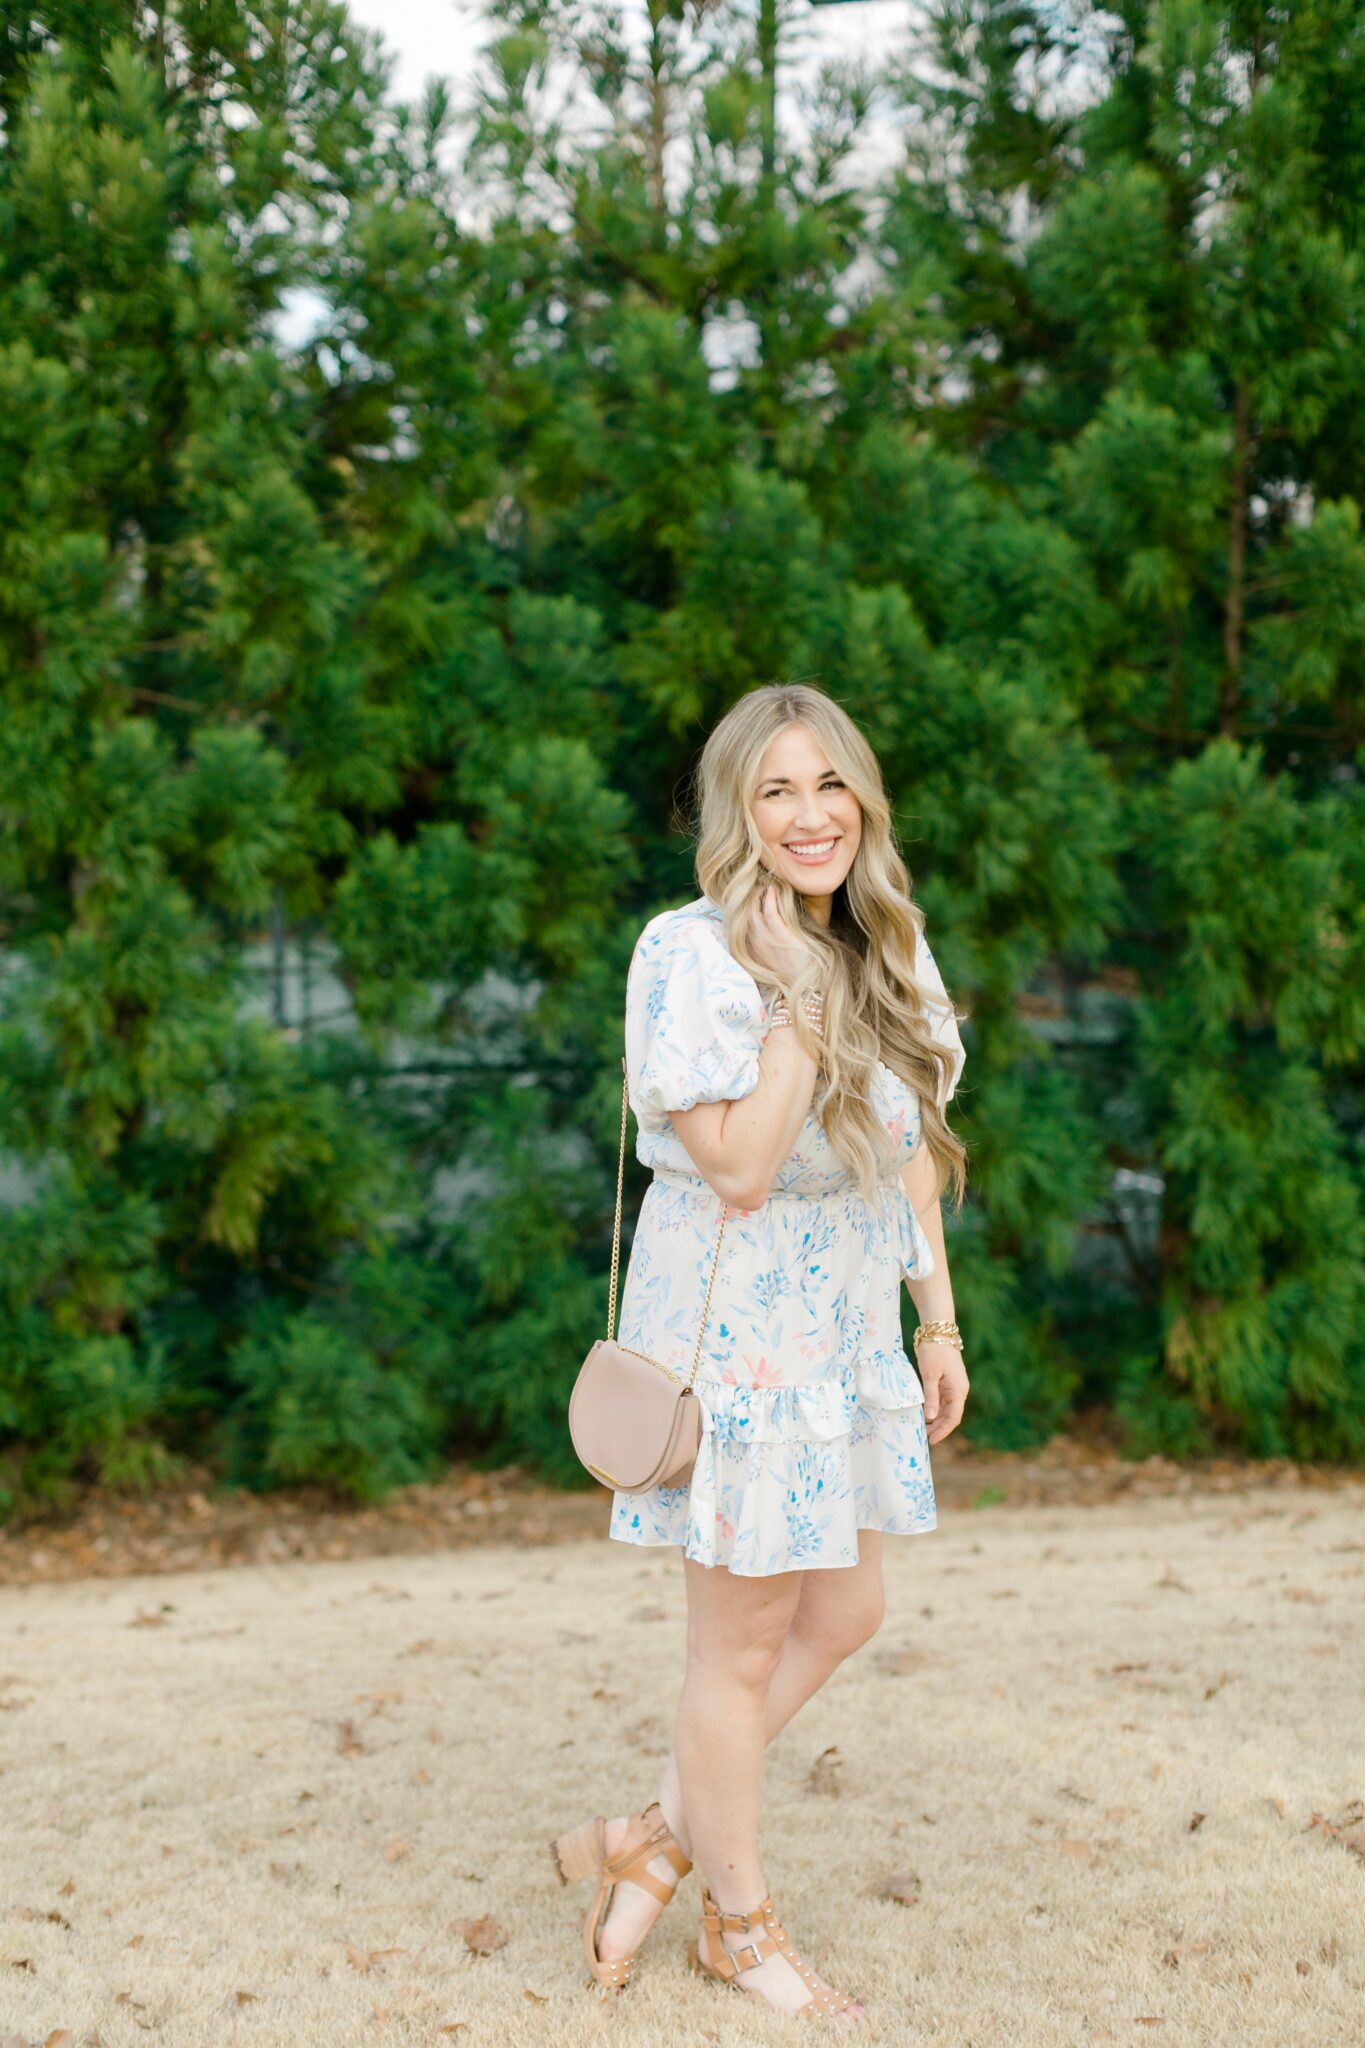 The Floral Easter Dress You Need This Season - Lizzie in Lace